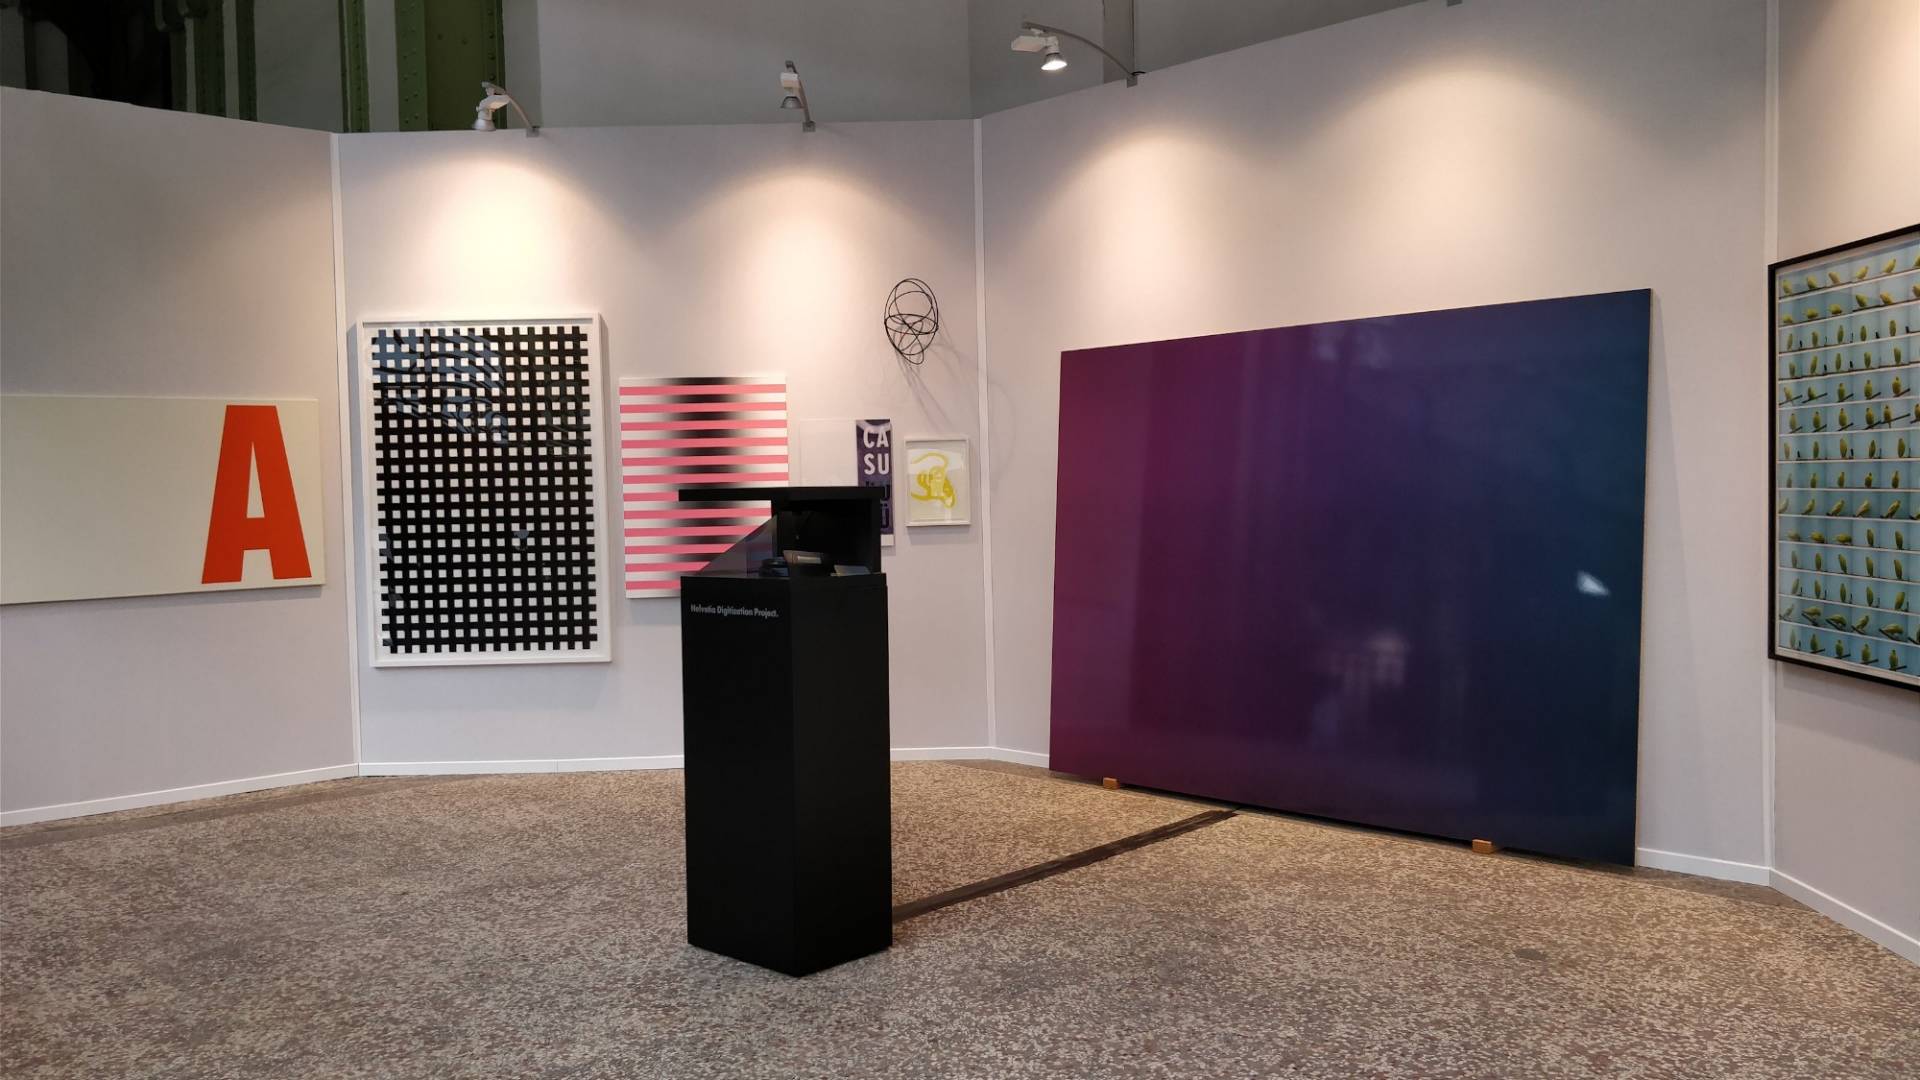 In the picture, you can see various works from the Helvetia Art Collection, which are being exhibited at the Art Paris Art Fair 2018.